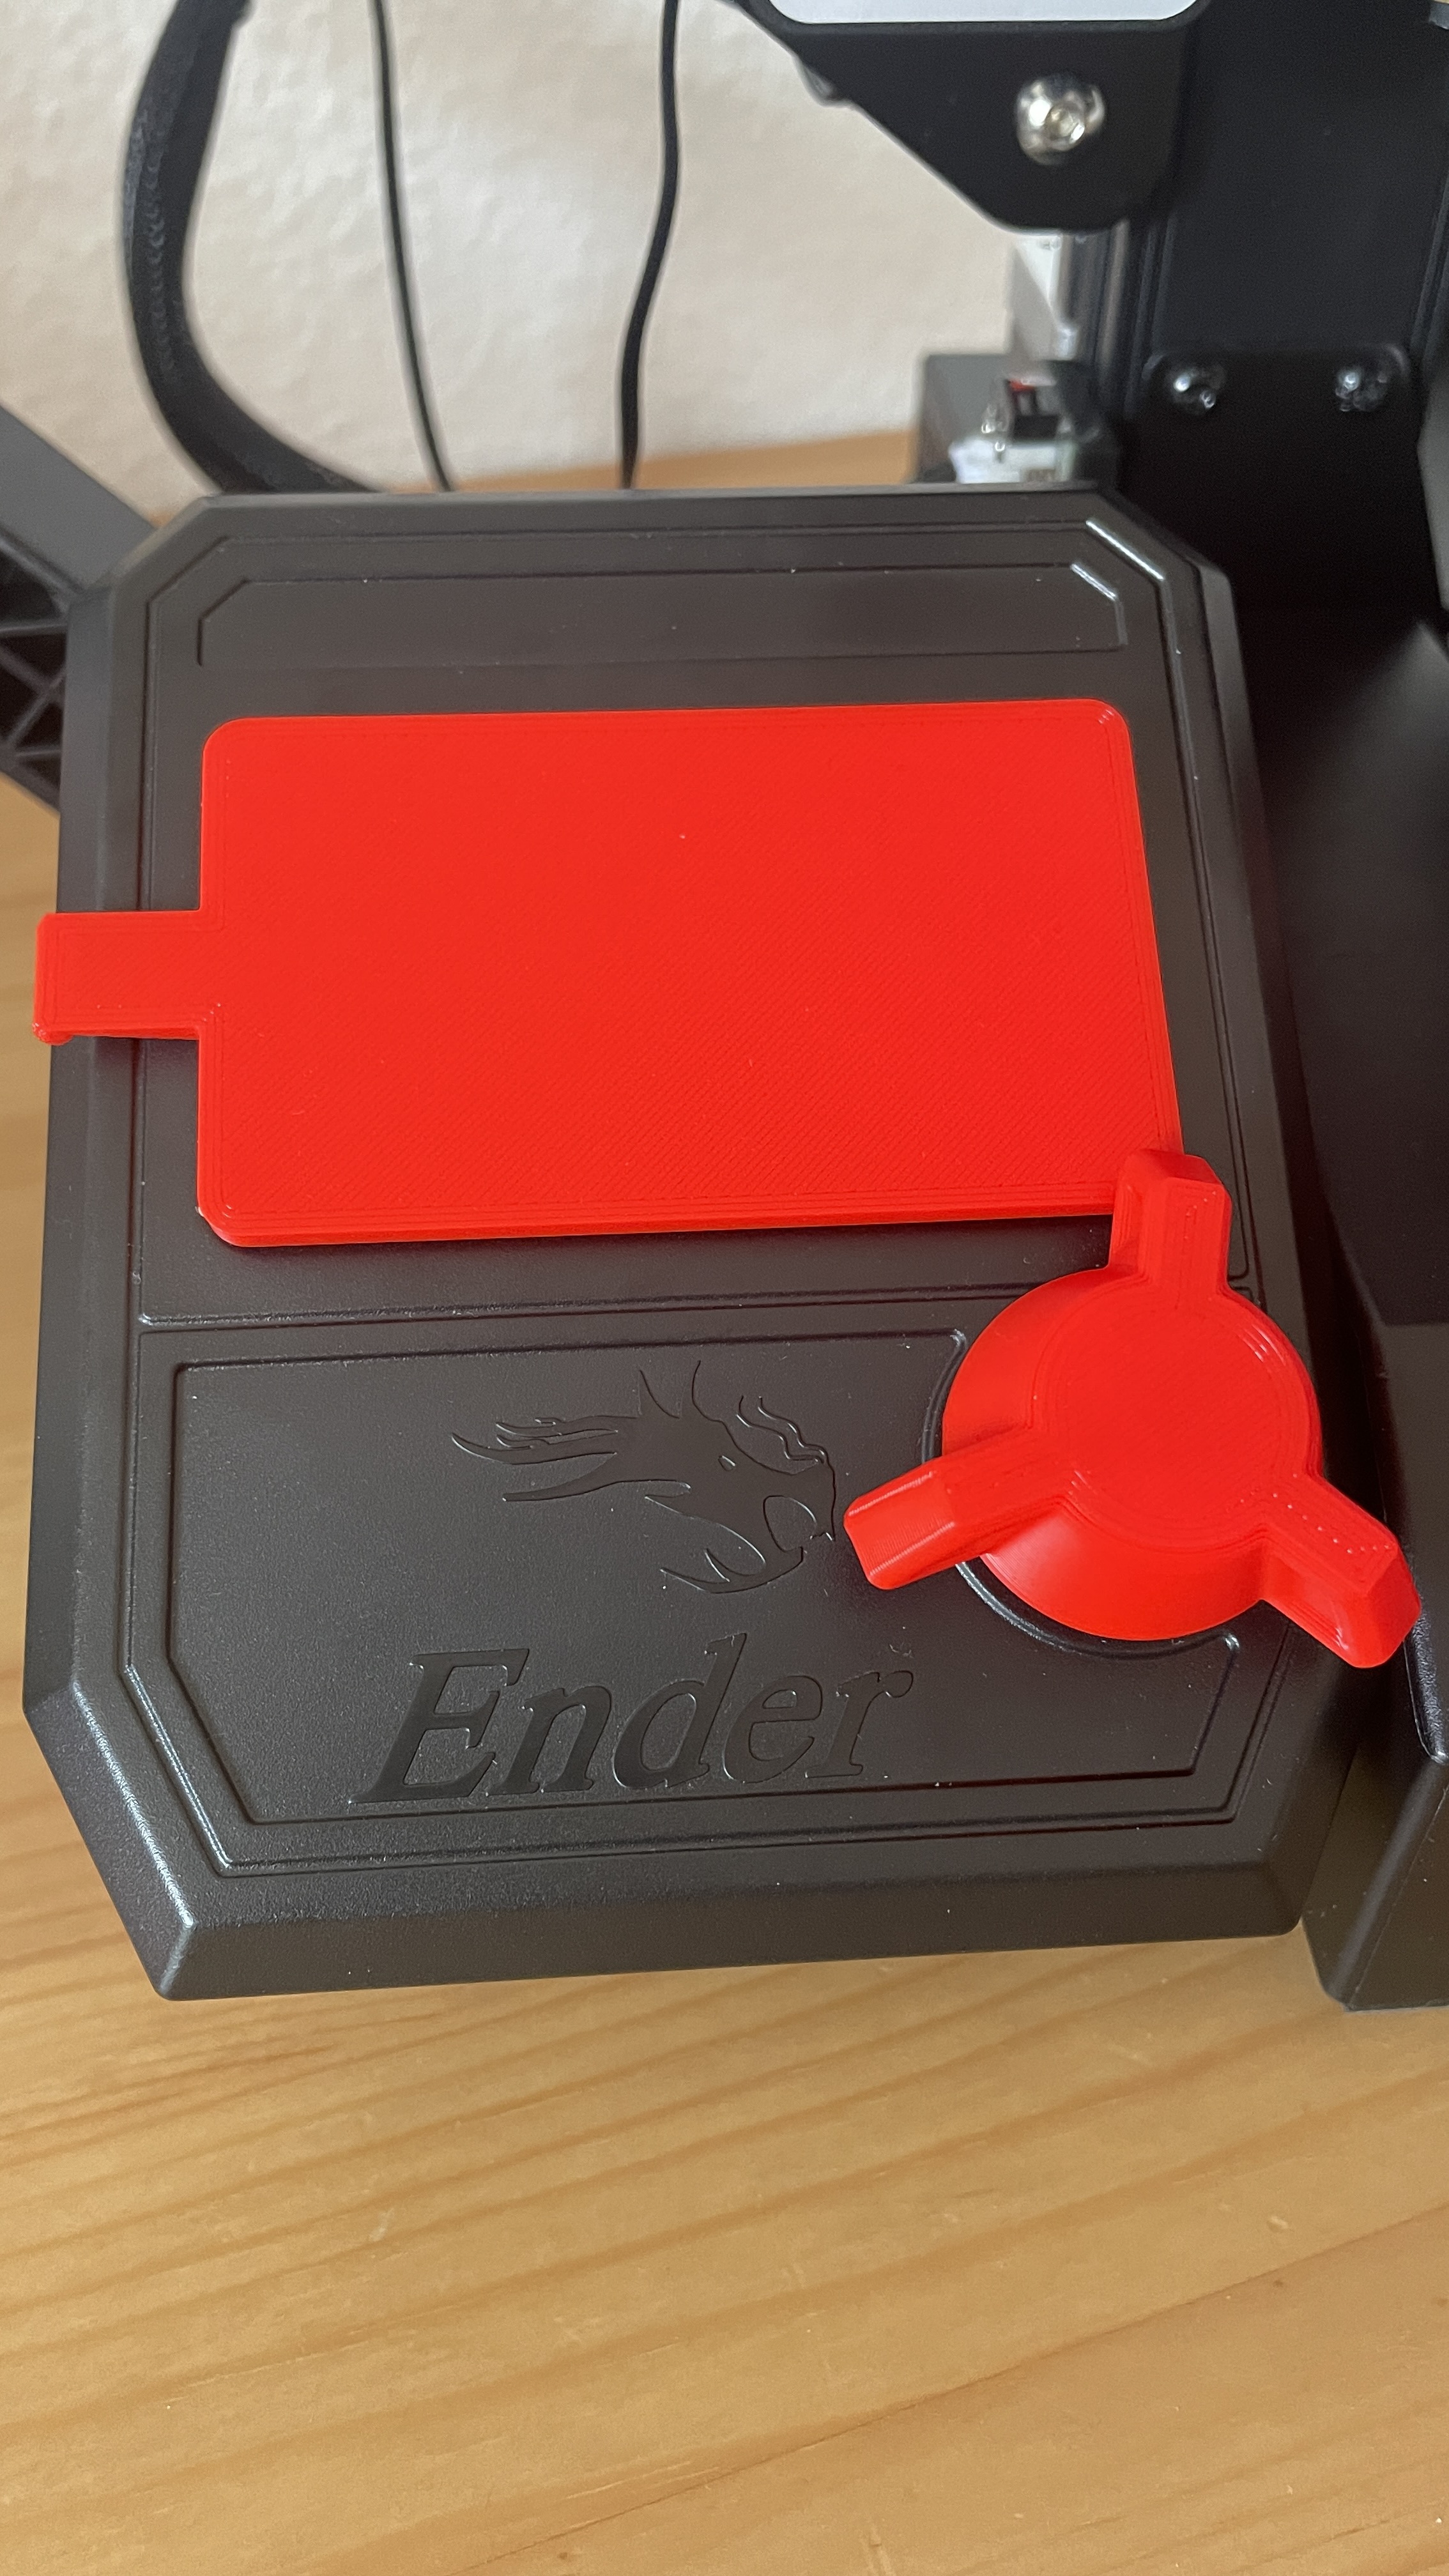 Ender 2 Pro Screencover